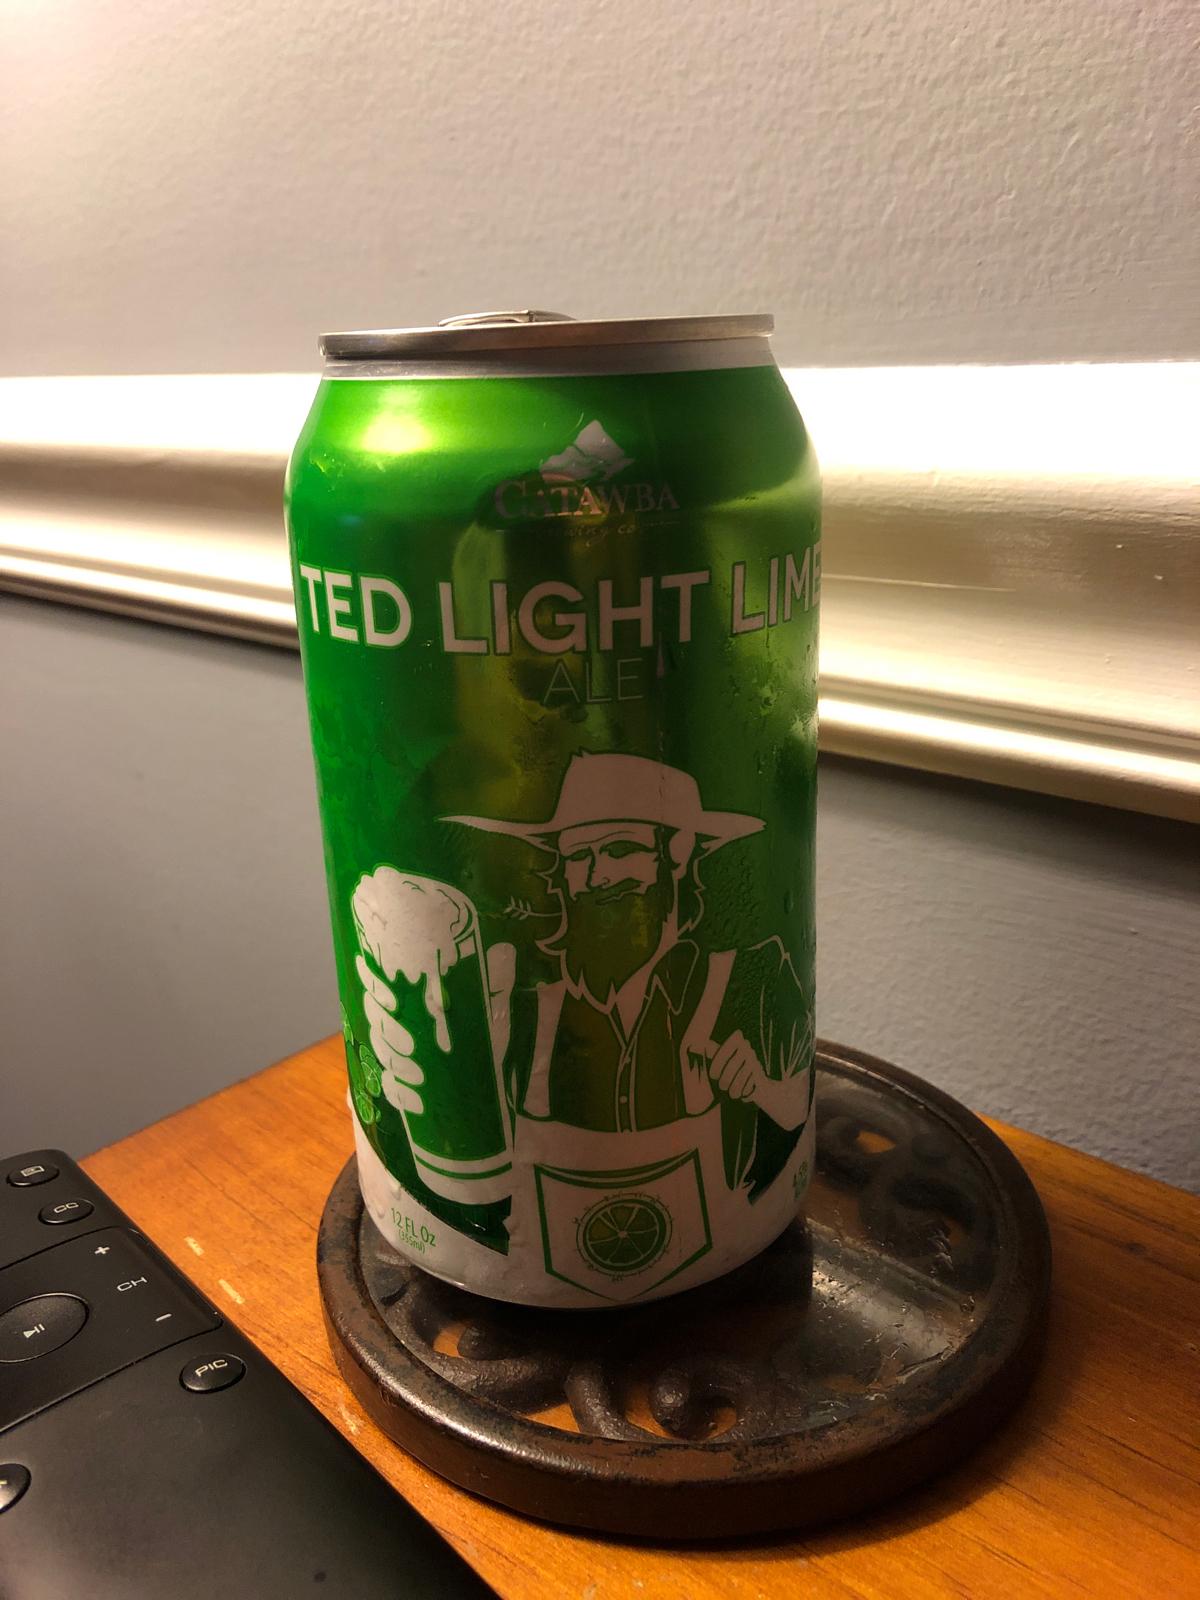 Ted Light Lime